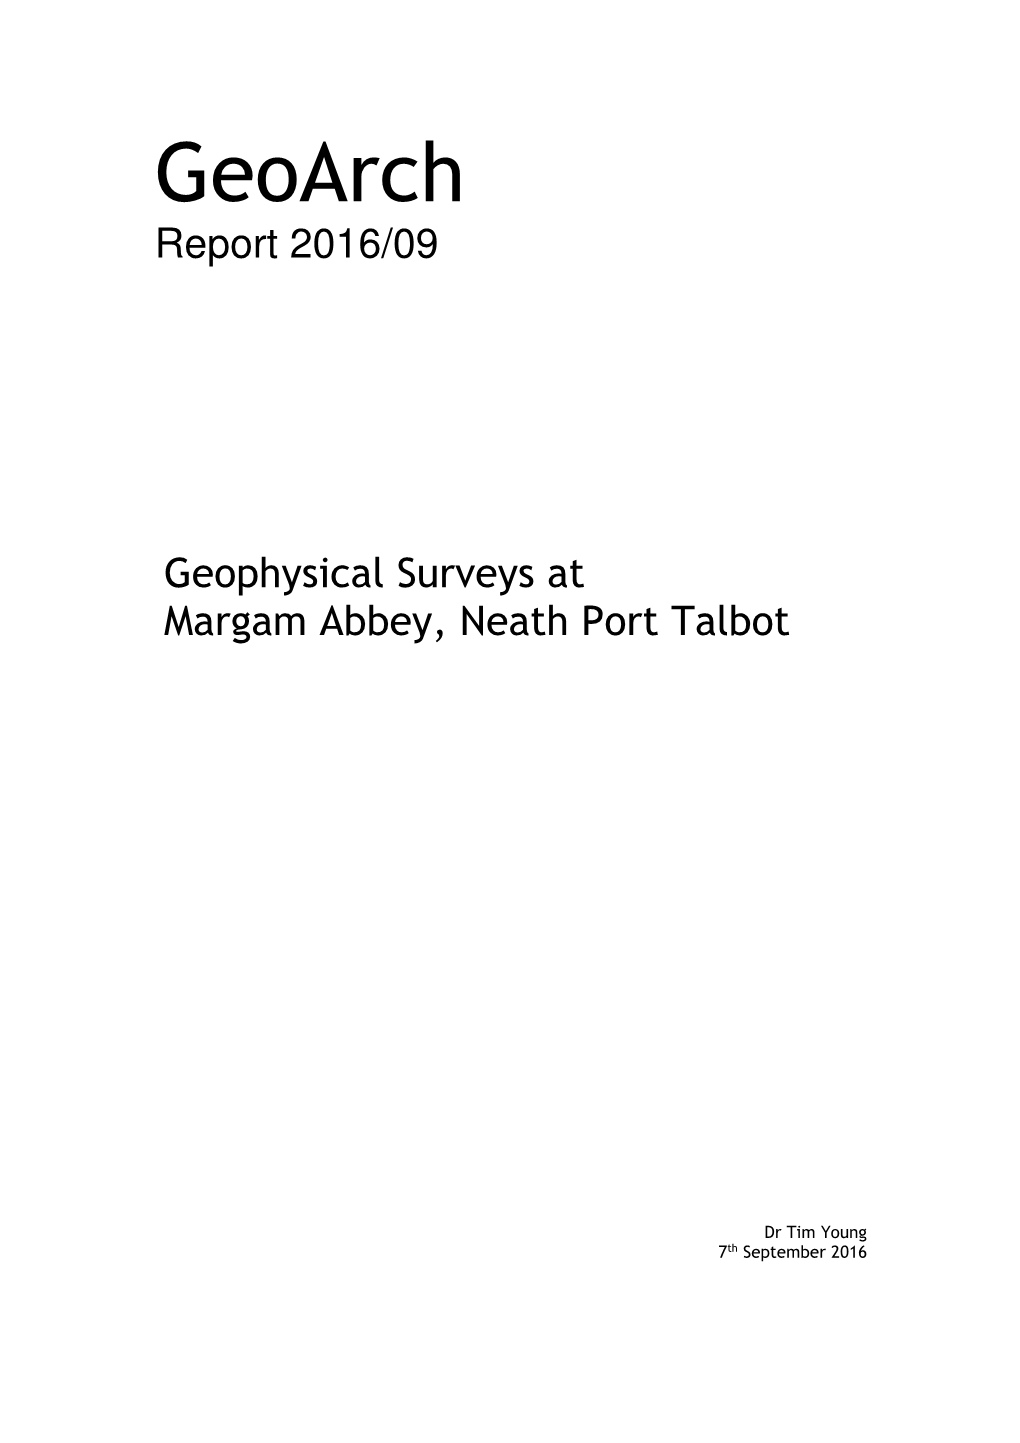 Geoarch Report 2016/09